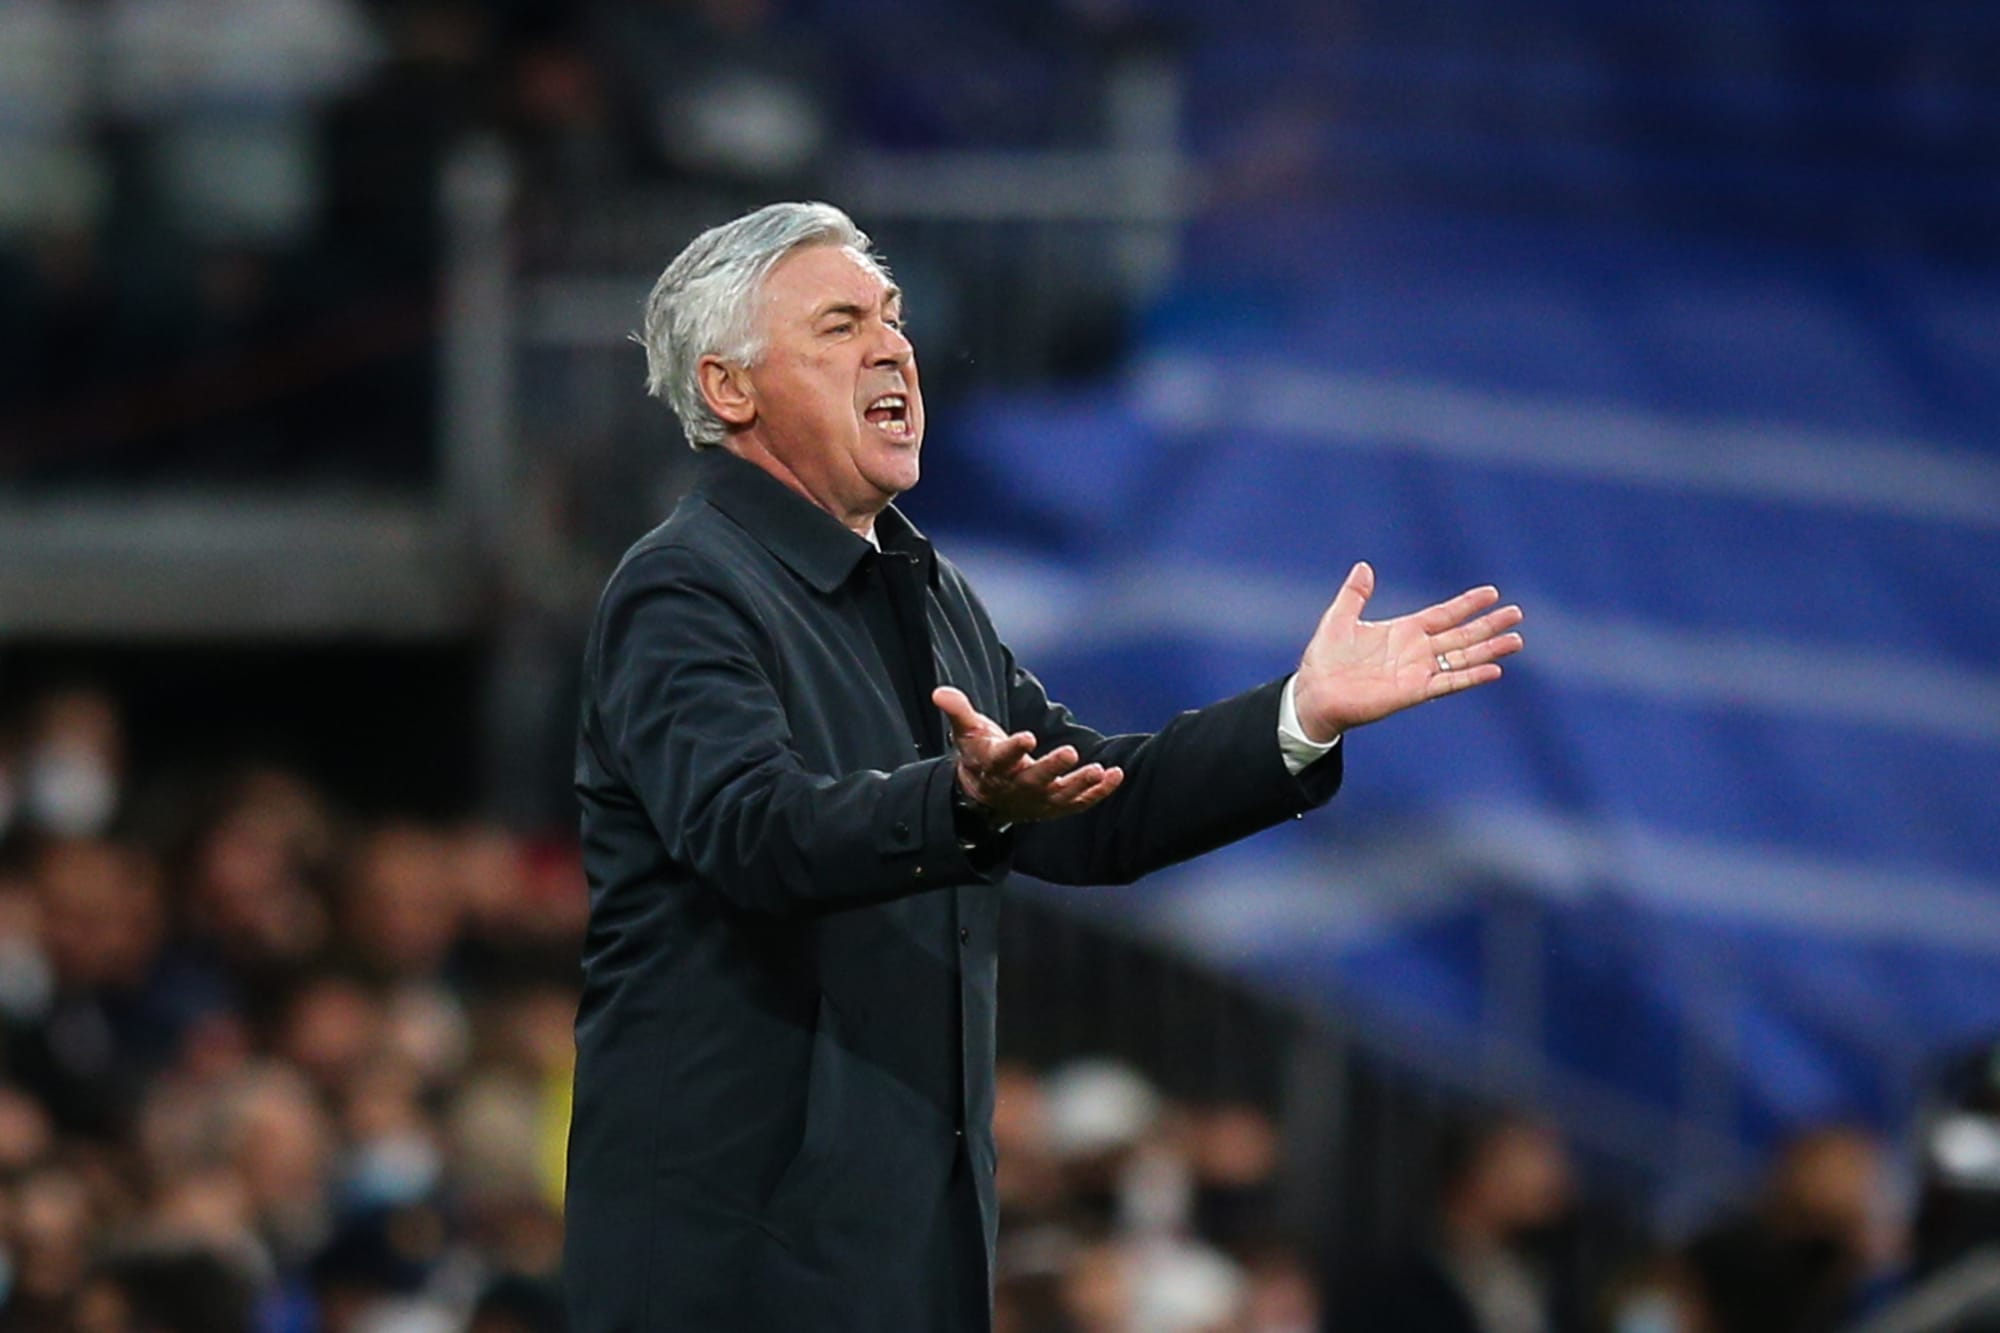 A sign Carlo Ancelotti will stay at Real Madrid for 2022/2023